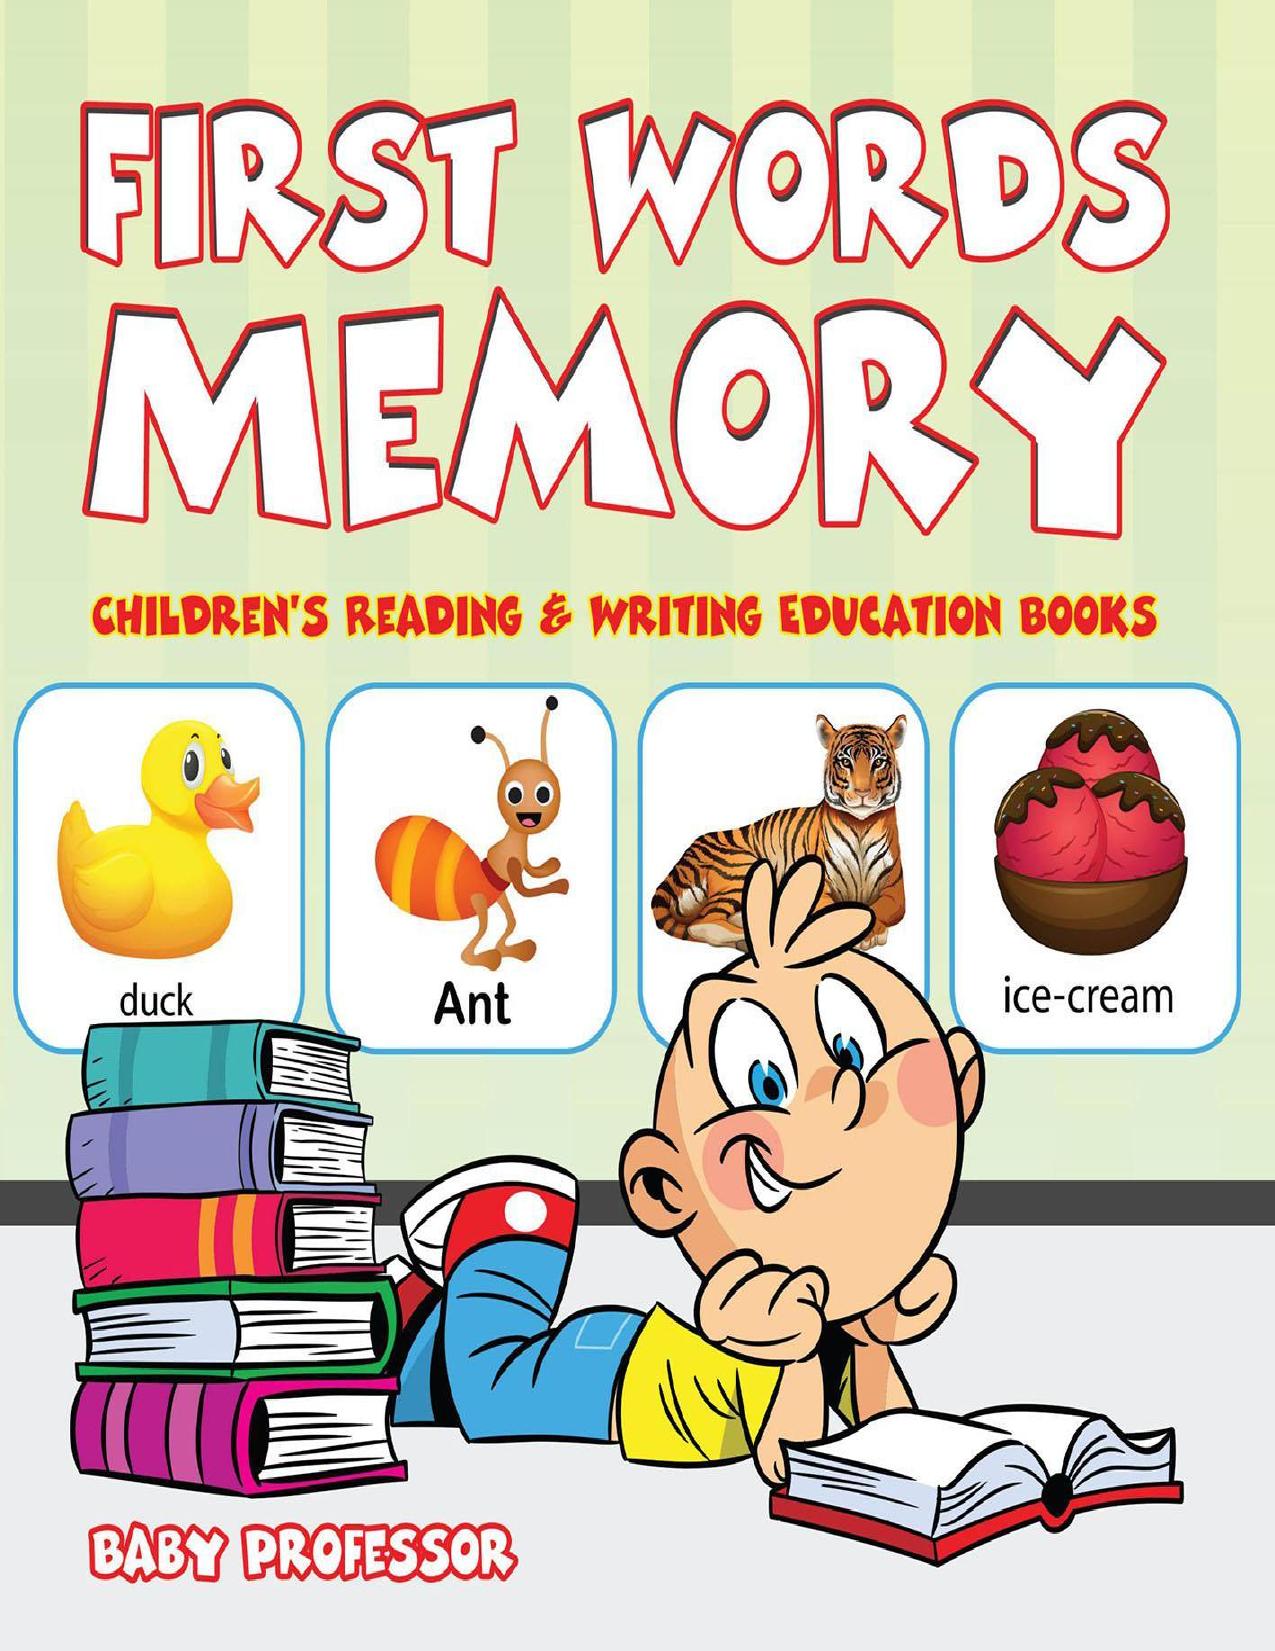 First Words Memory : Children's Reading & Writing Education Books by Baby Professor